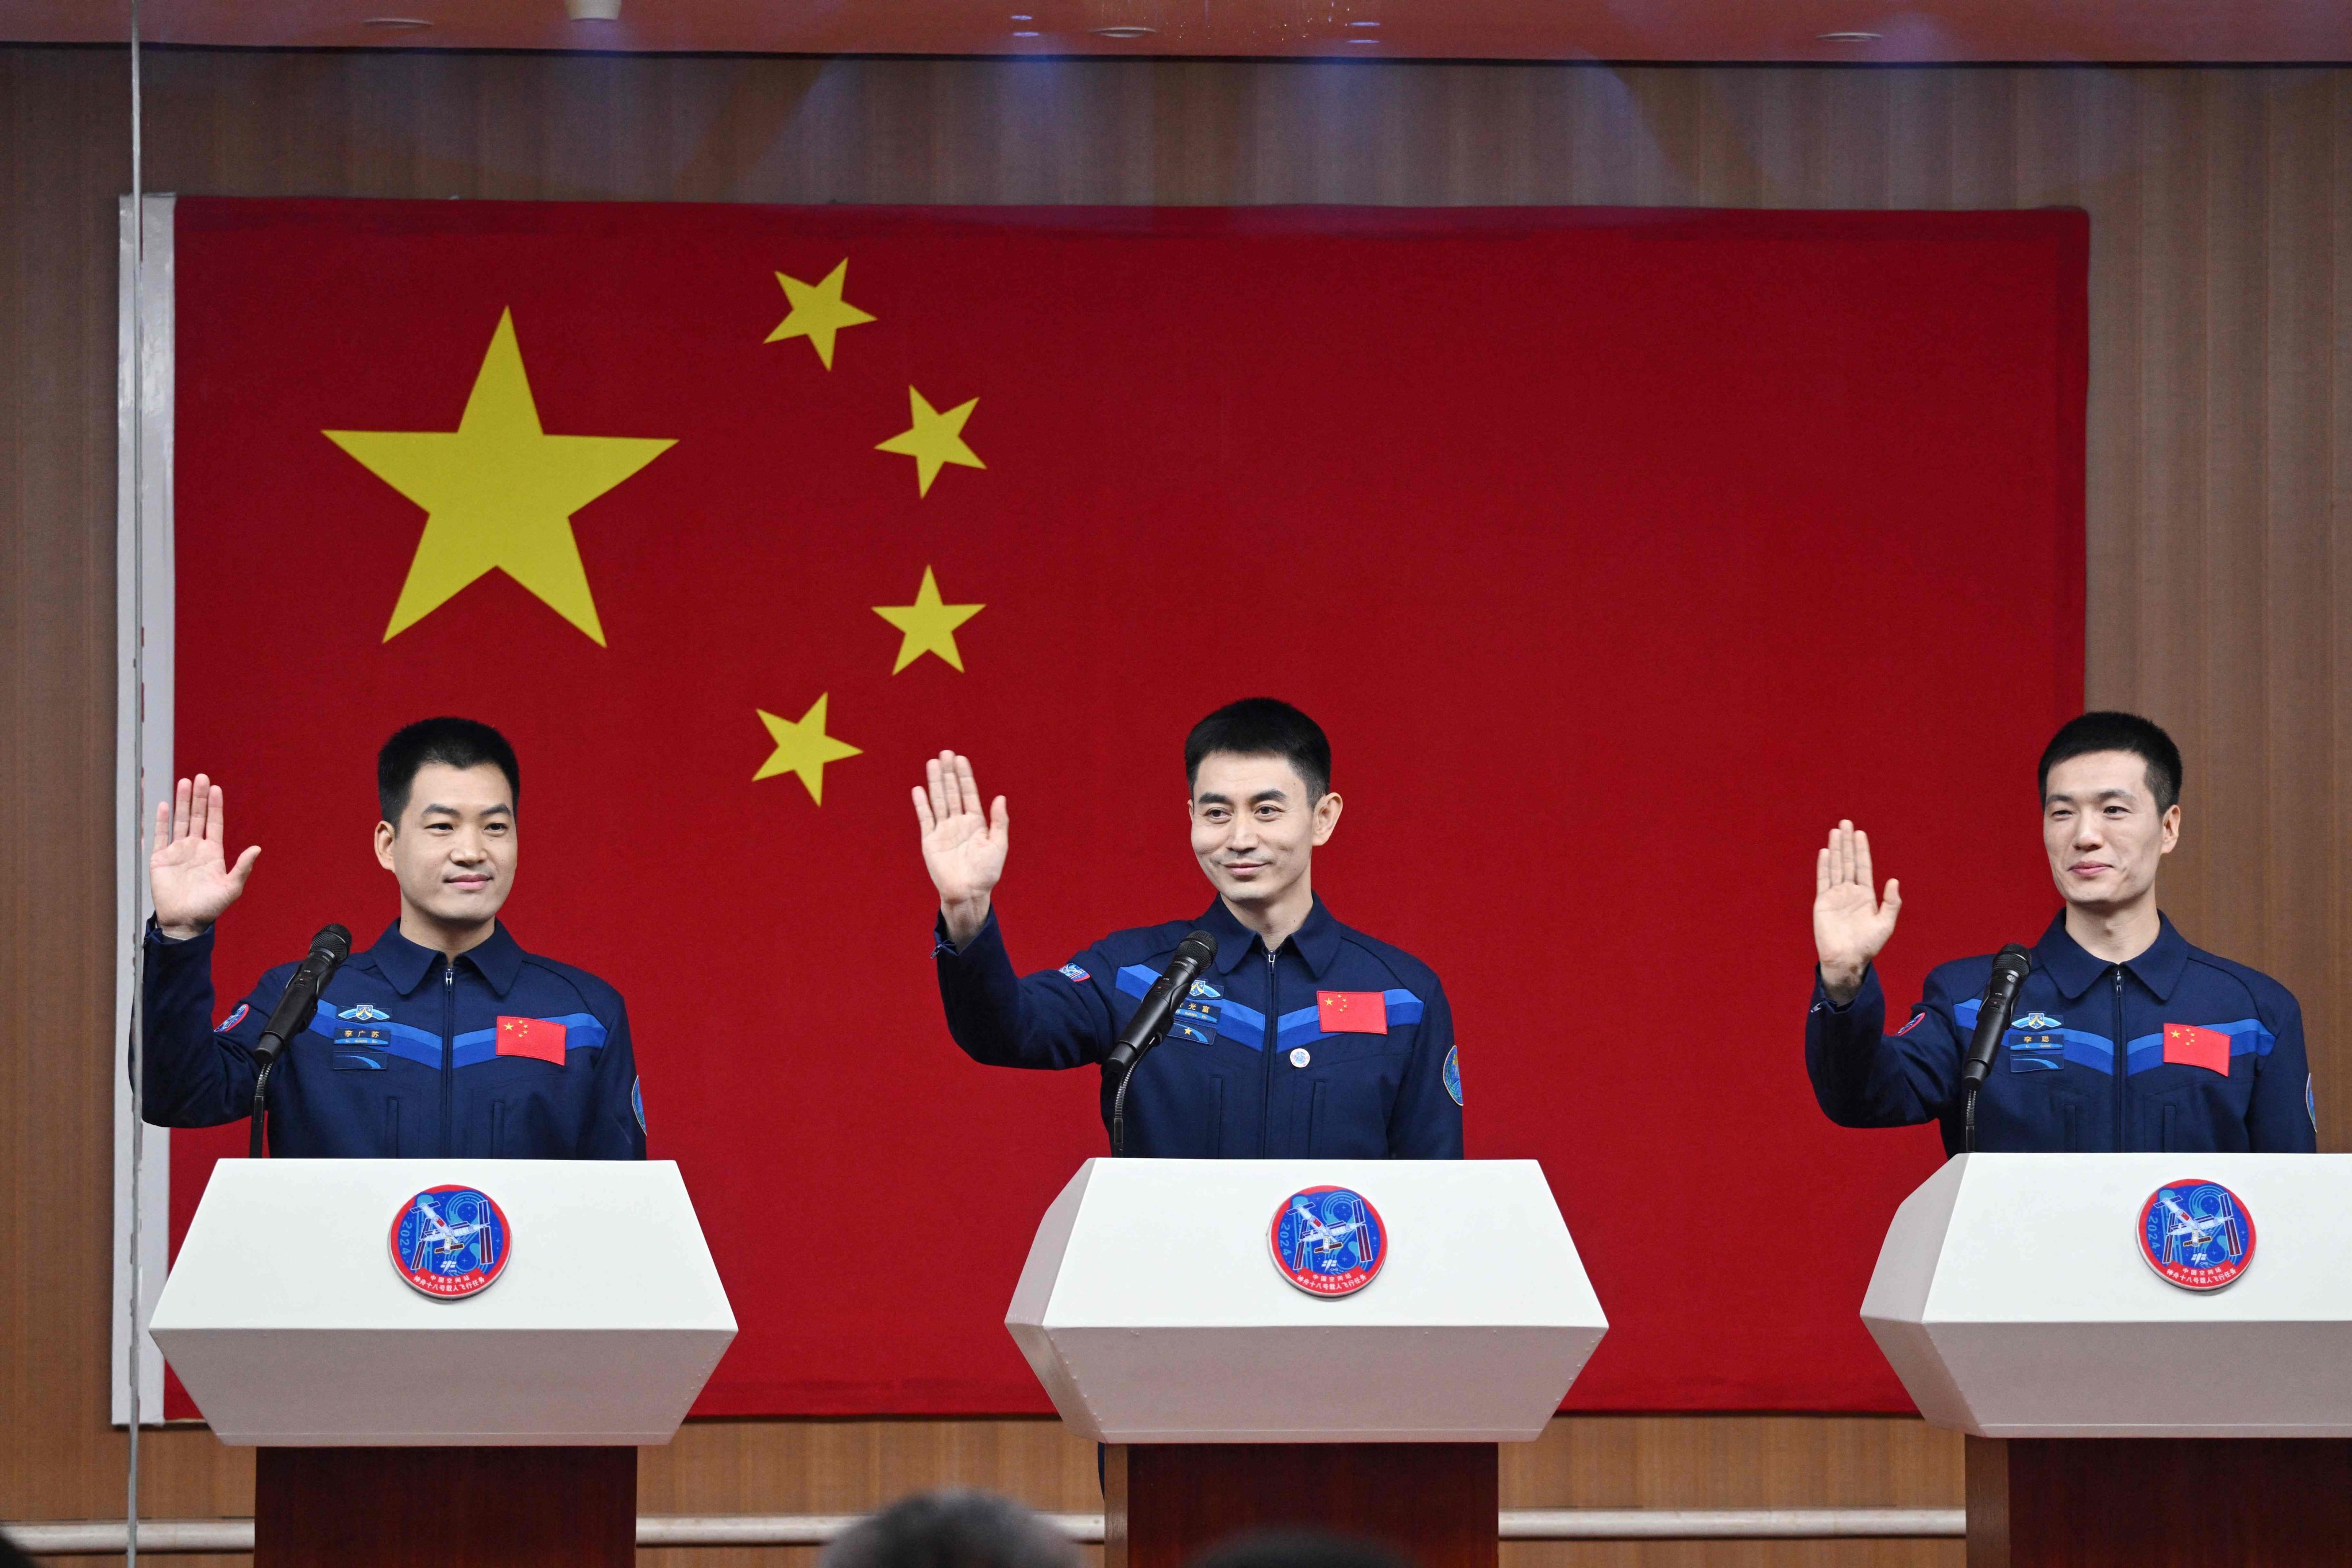 Shenzhou-18 crew members (from left to right) Li Guangsu, Ye Guangfu and Li Cong wave during a press conference at the Jiuquan Satellite Launch Centre in northwest China on April 24. Photo: AFP